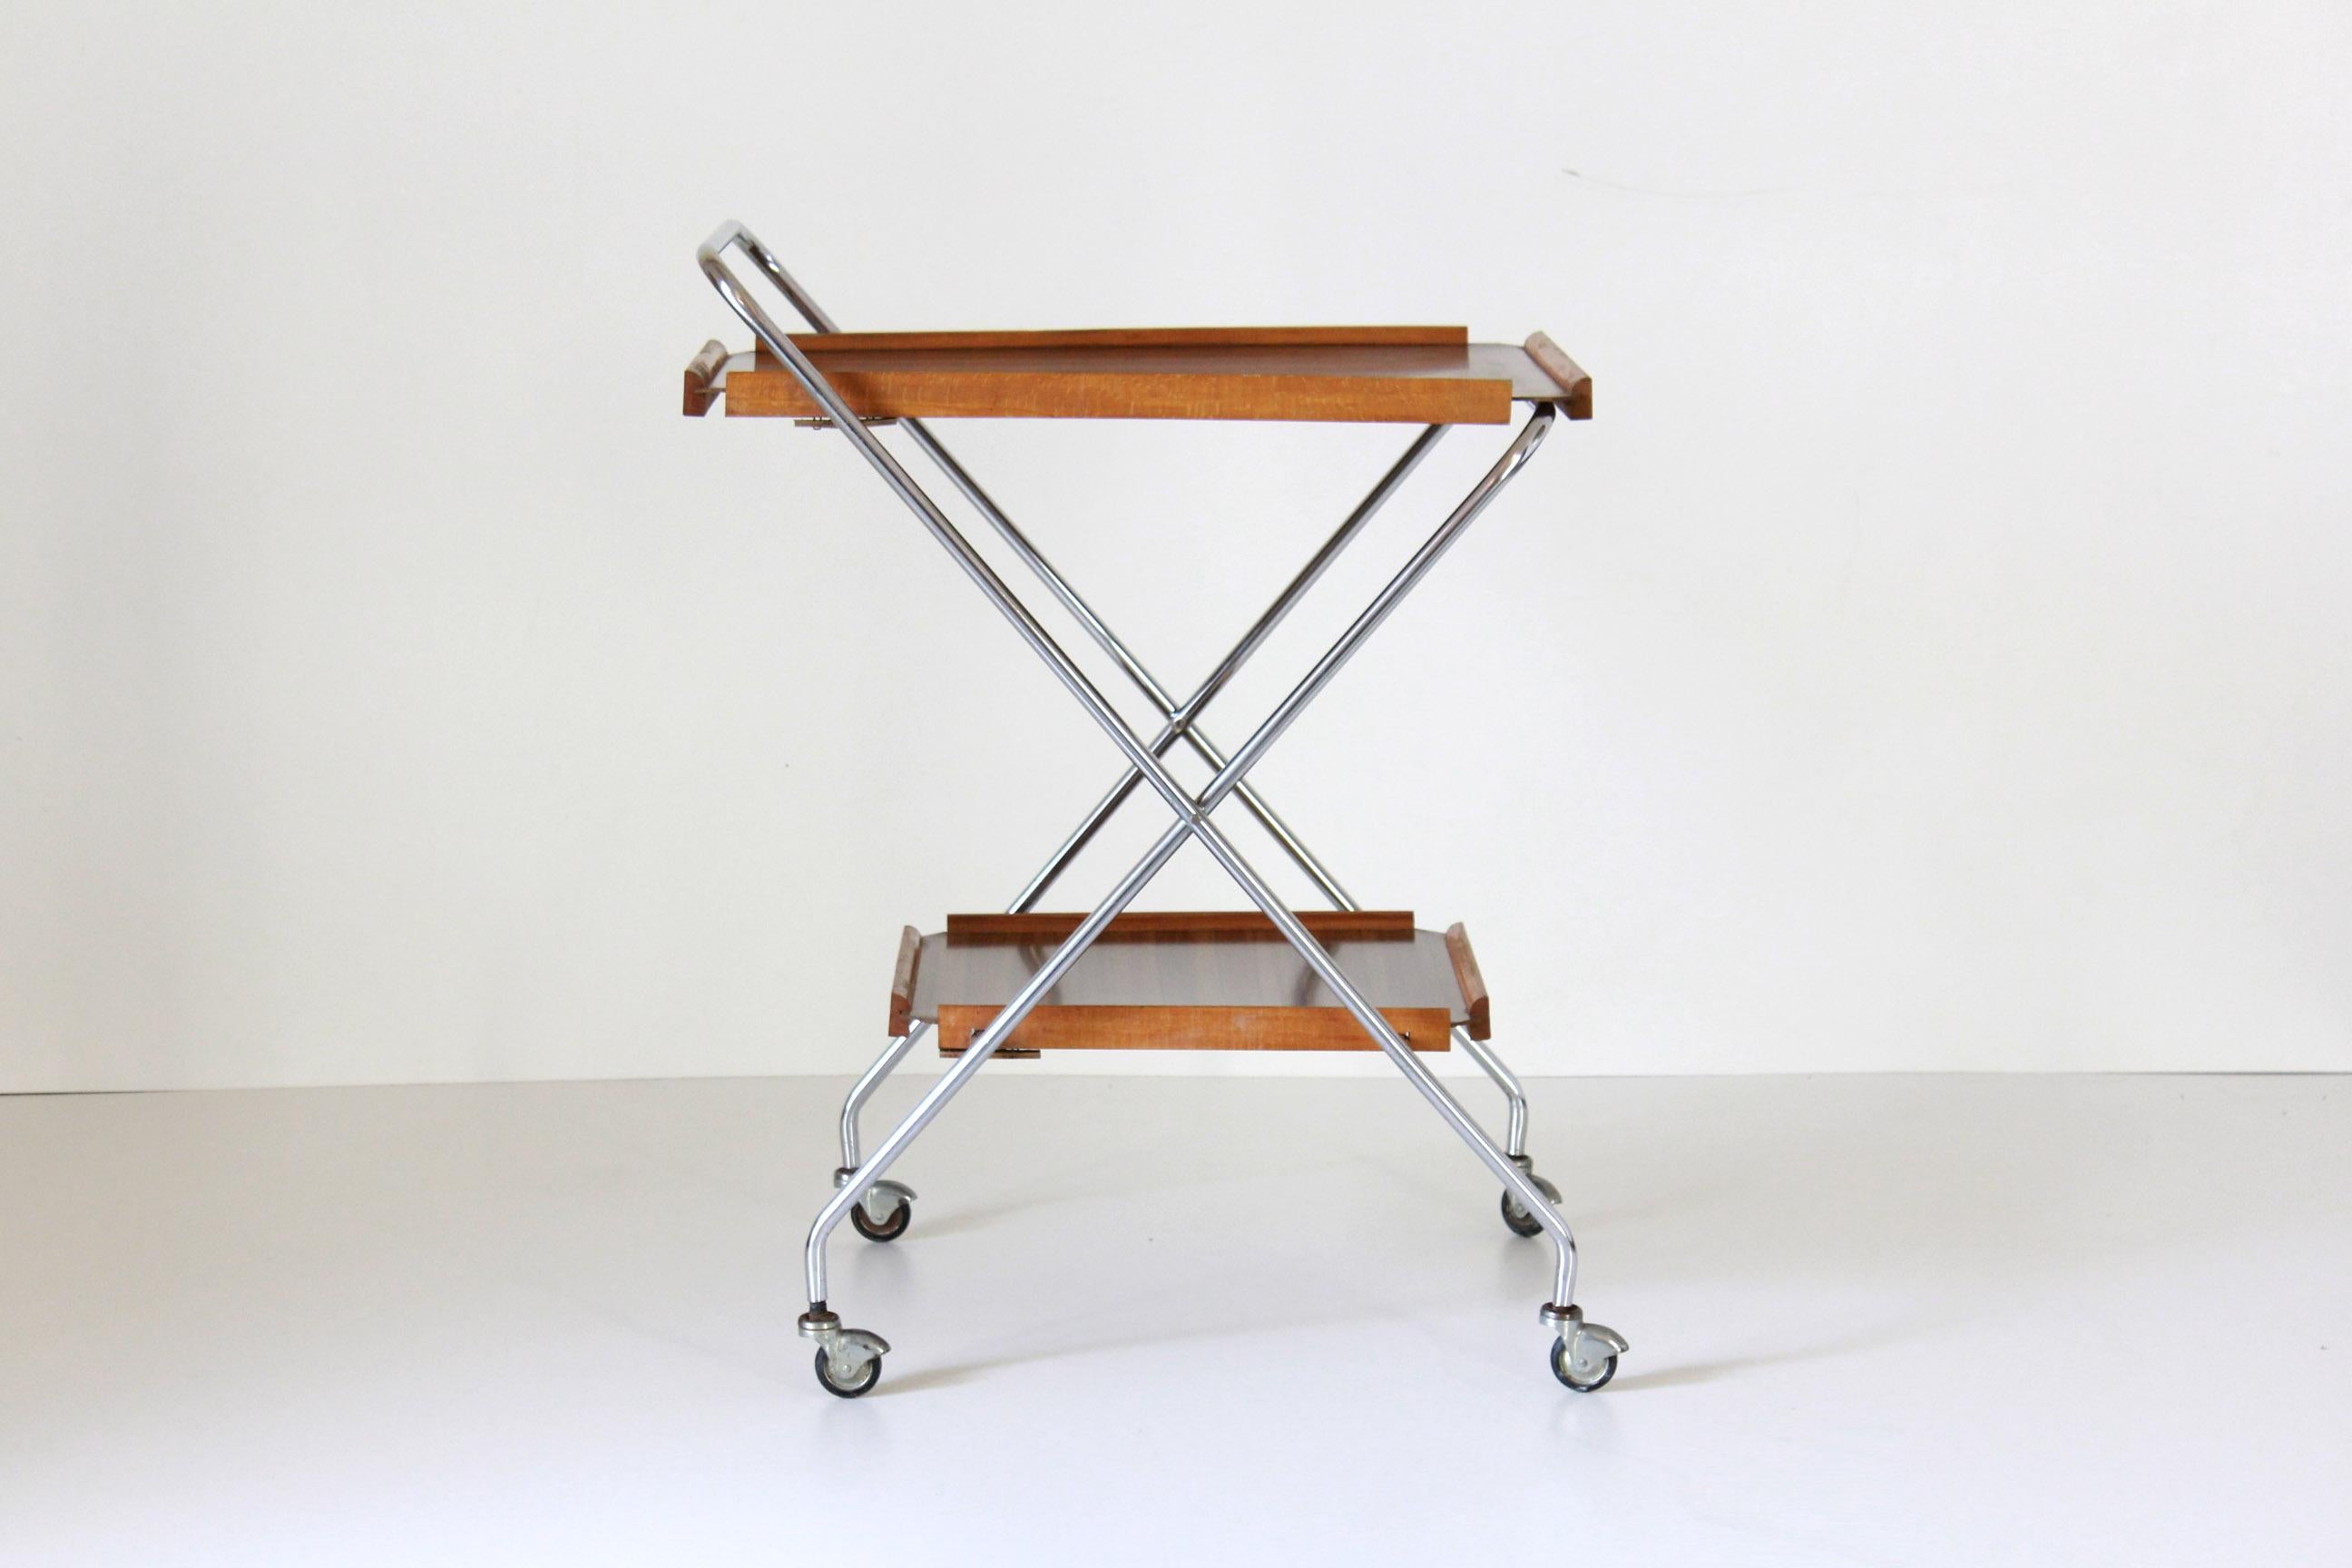 1950s bakelite and solid wood trolley bar. Iron structure. In really good conditions. 

Can be easily closed to storage (and also easy and safe to deliver).